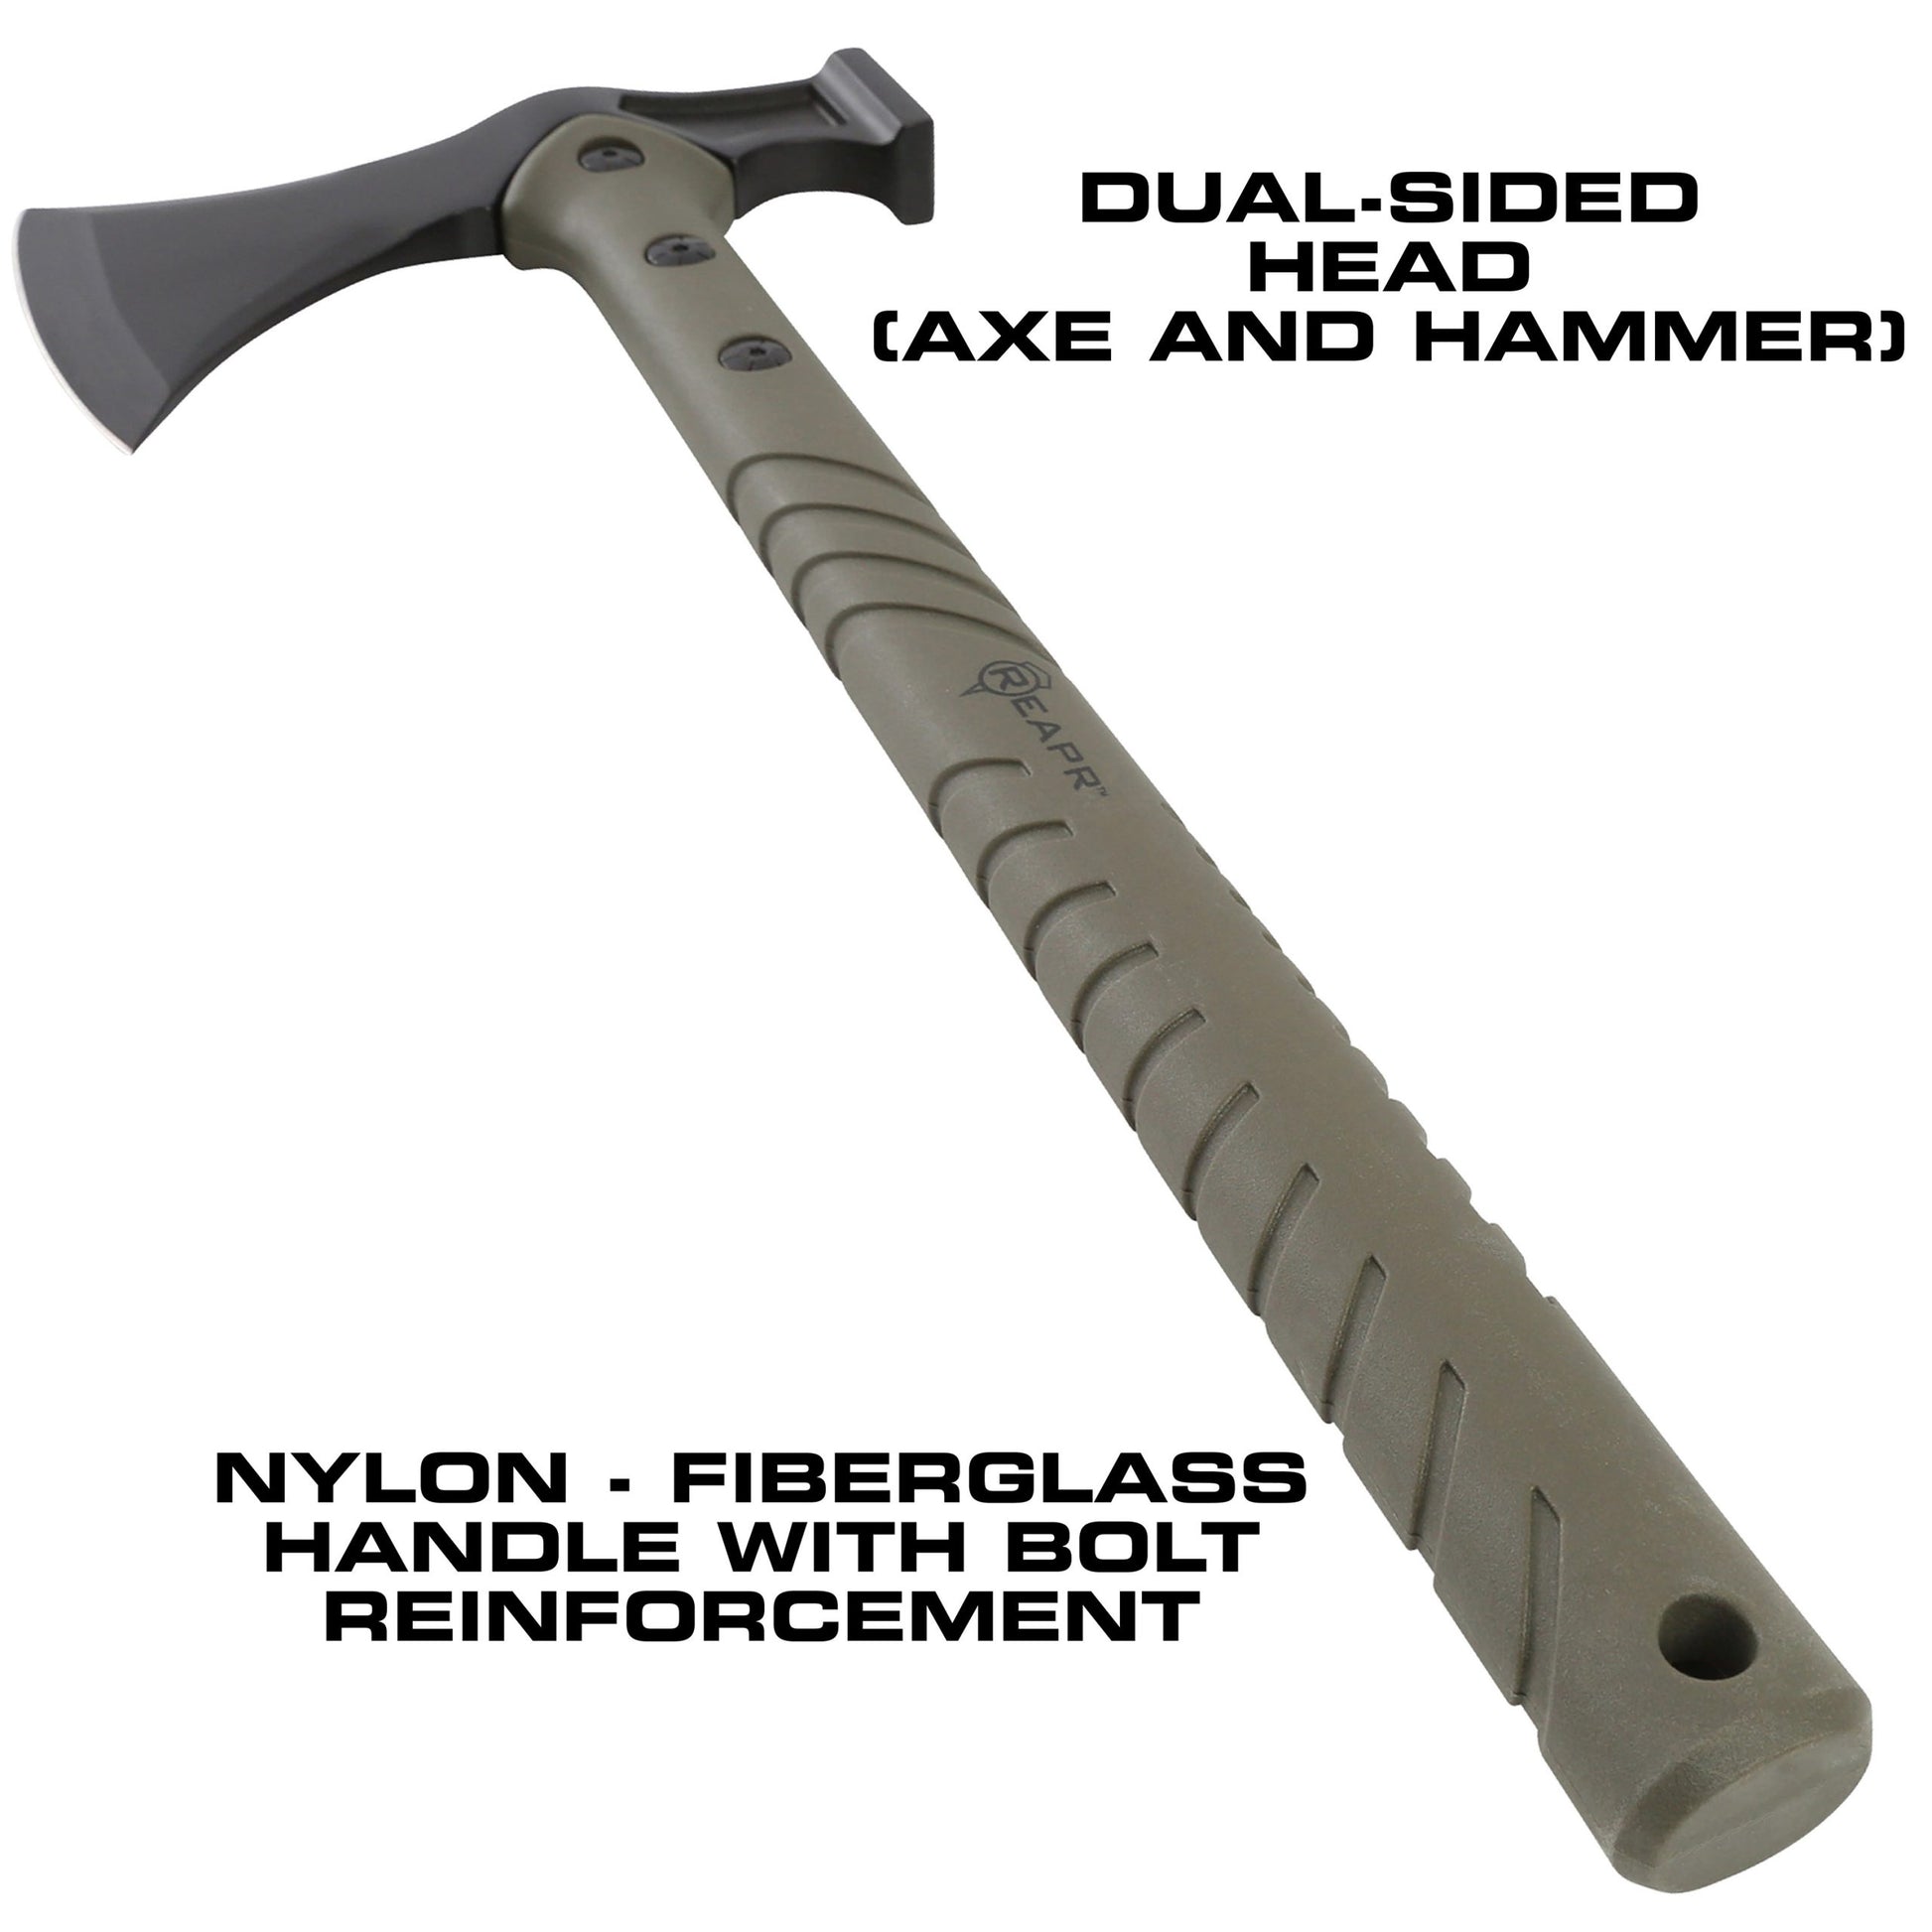 The Sparrow Hammer Axe gives you the utility for camping trips and wilderness survival prep with a design that sets this axe apart from the crowd. The Sparrow is a two-in-one axe and hammer combination that matches quality with functionality. www.defenceqstore.com.au